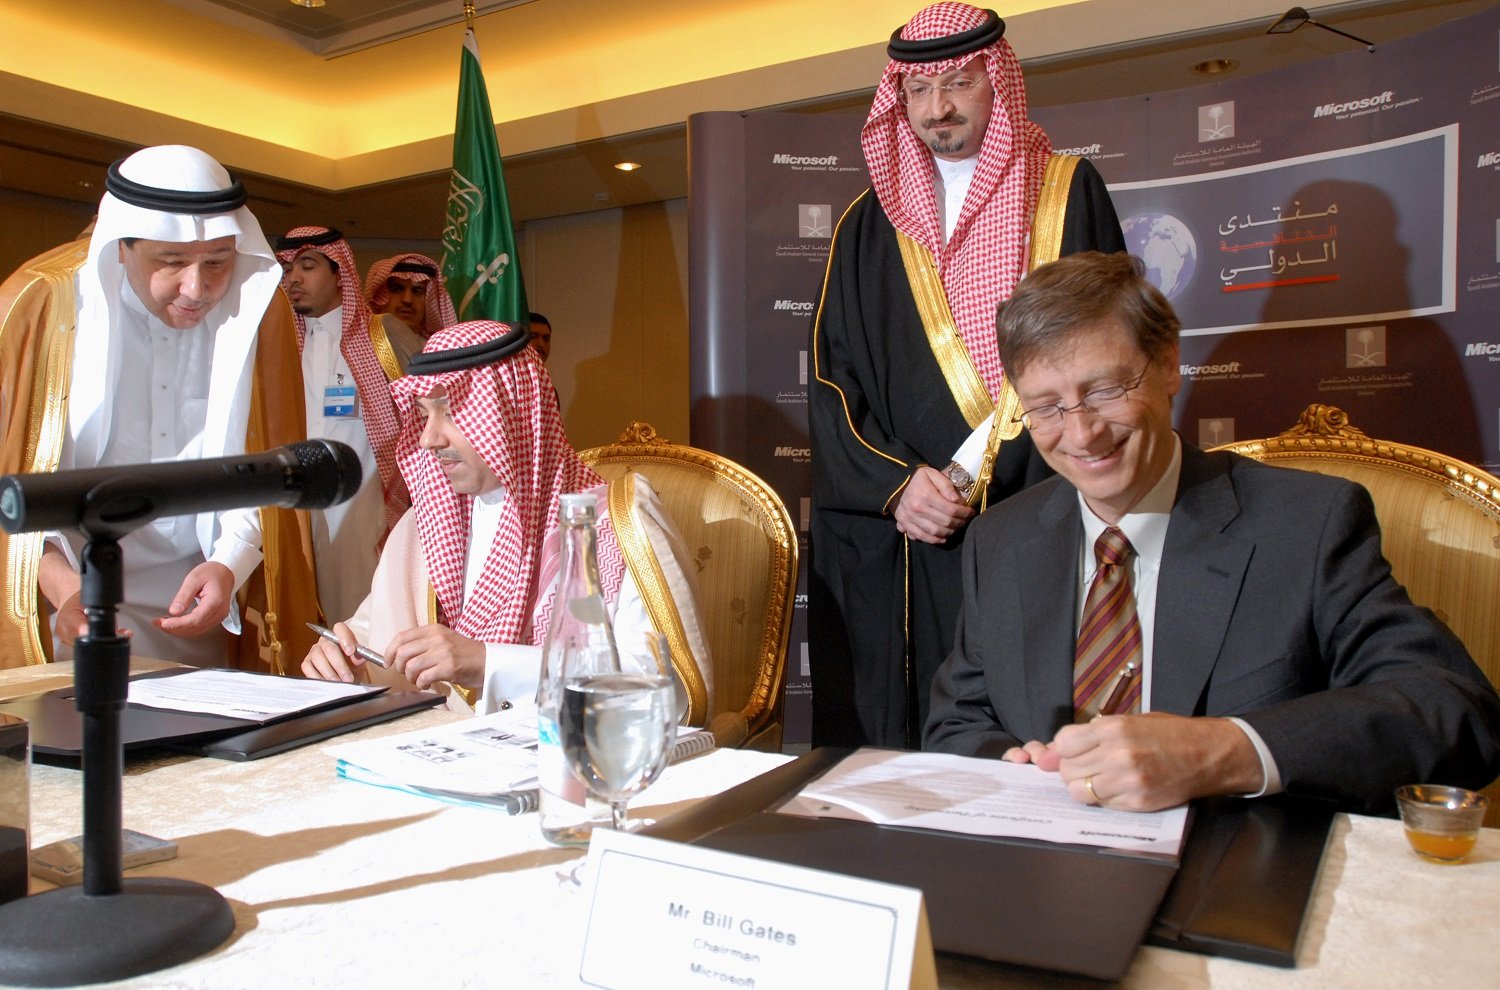 Bill Gates Just Bought Controlling Interest In The Four Seasons Hotel Chain From Saudi Prince Al Waleed Bin Talal